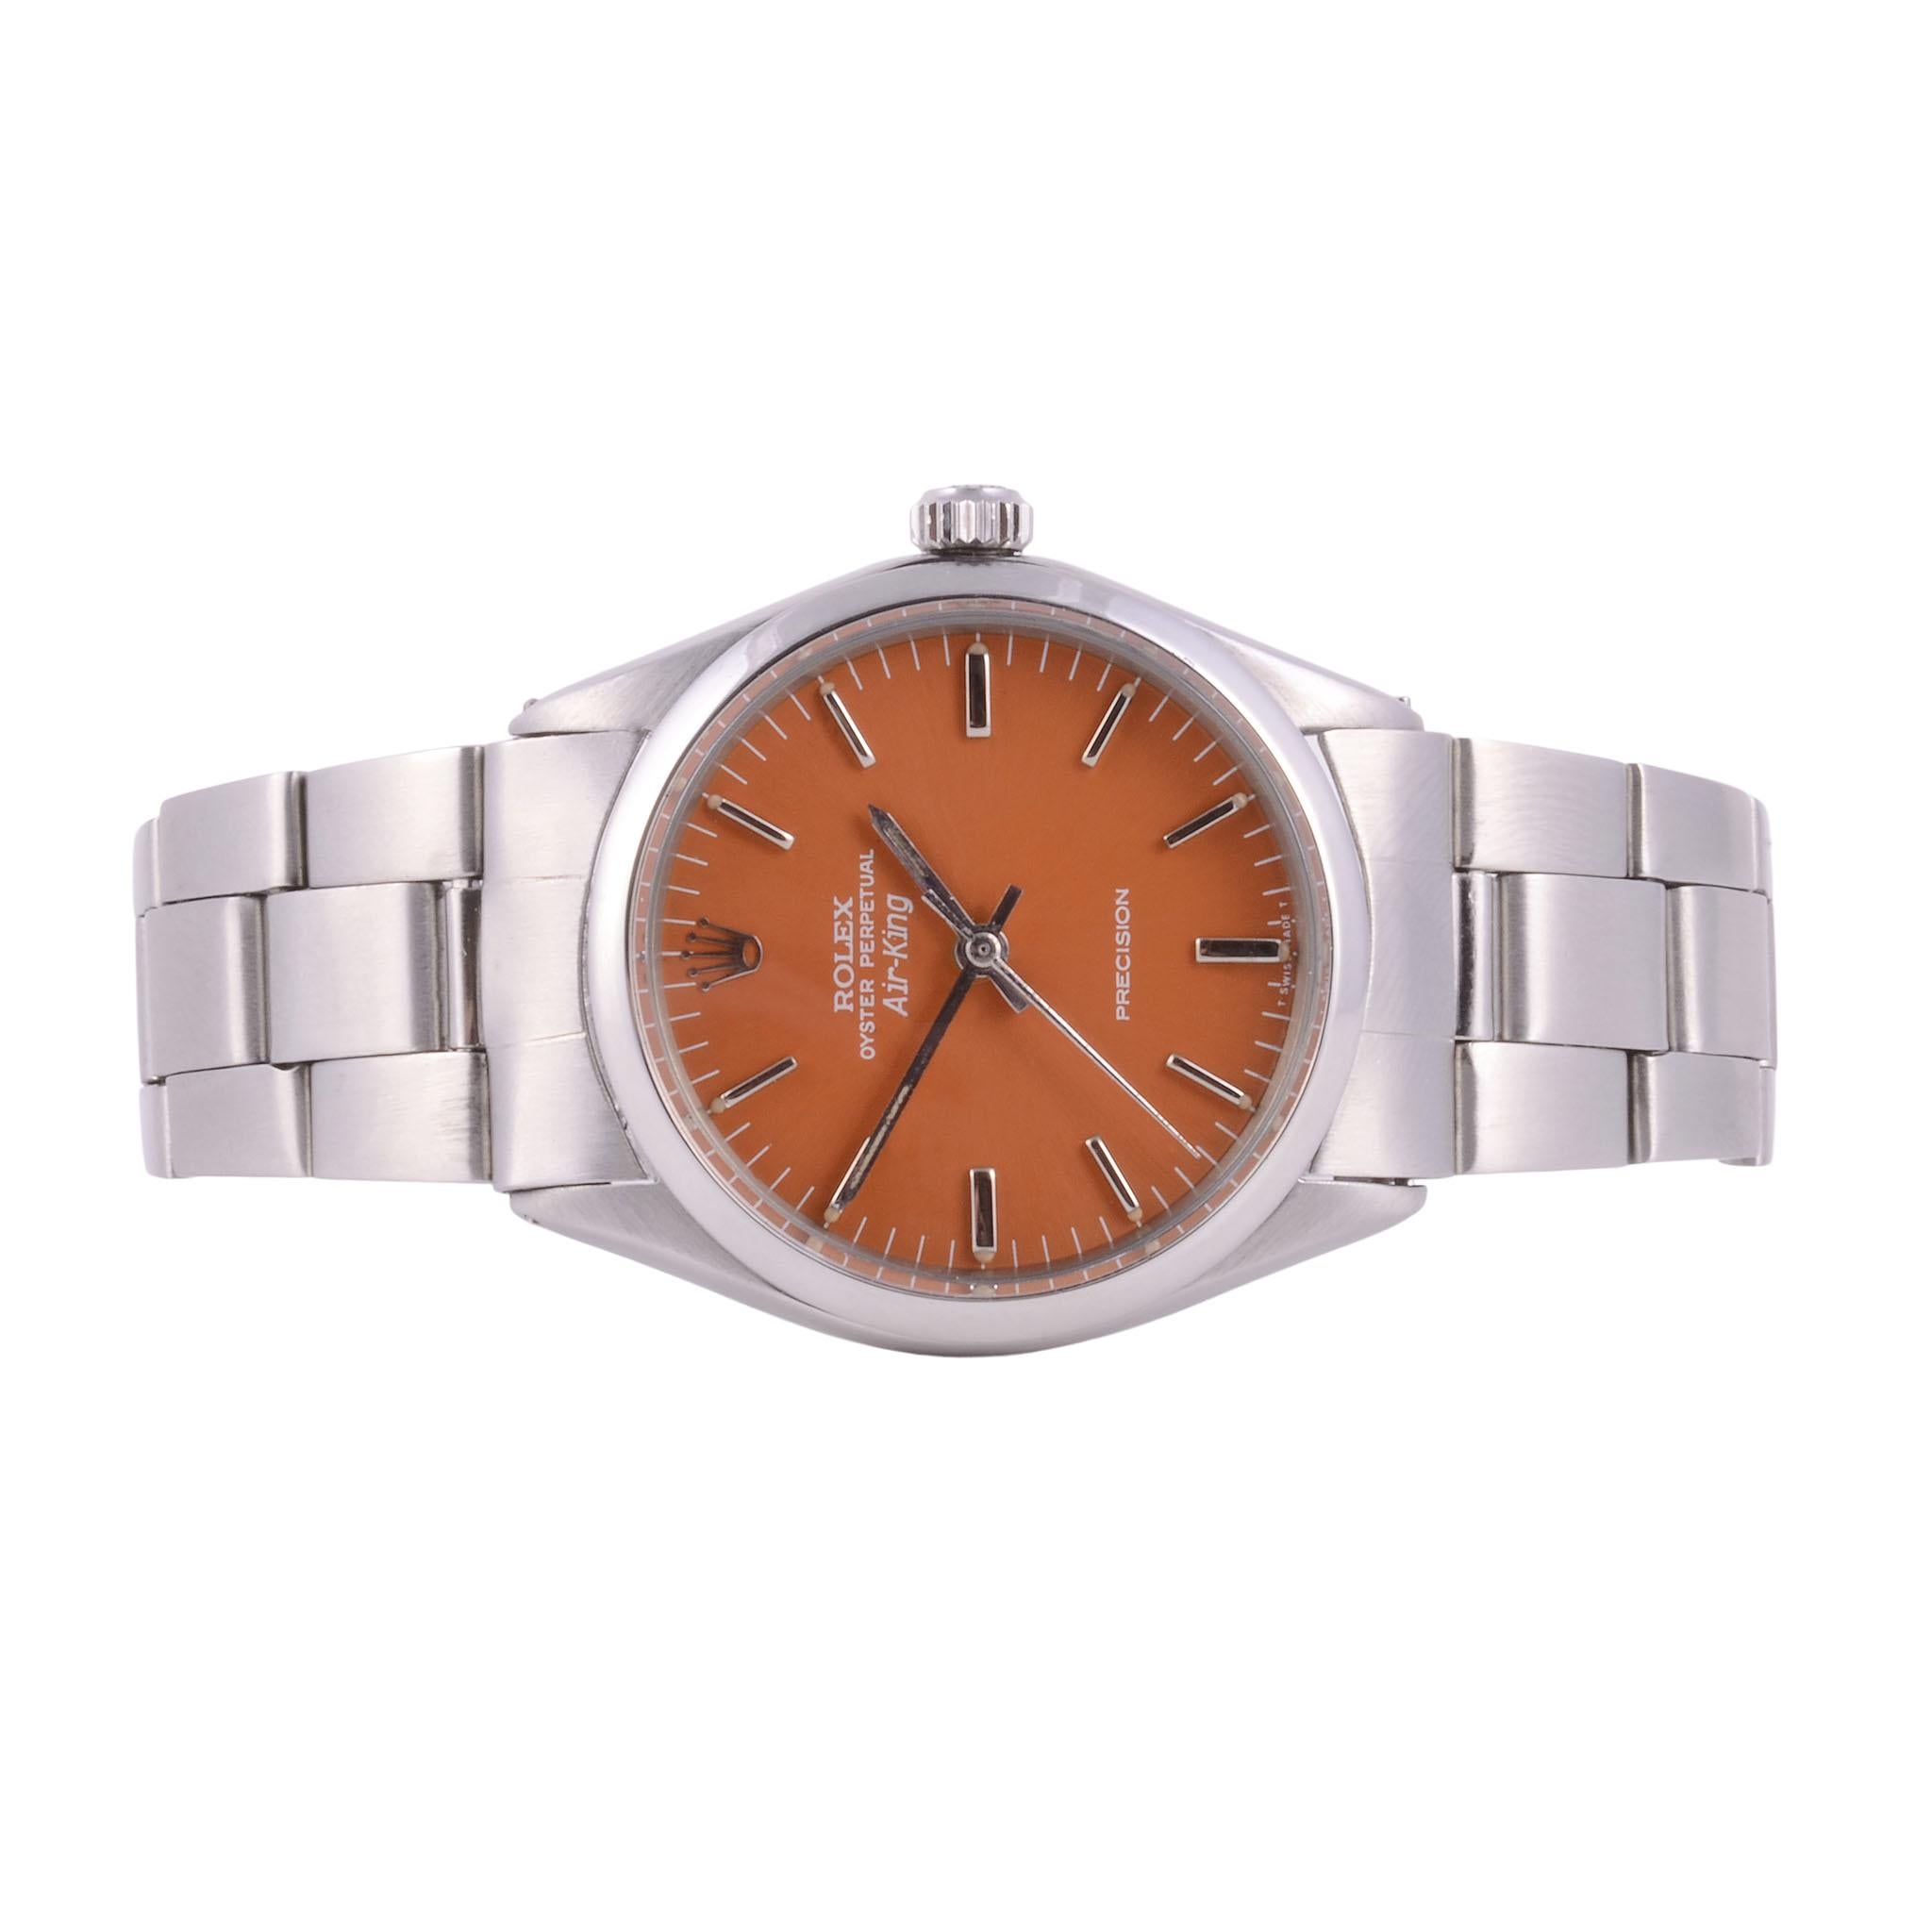 Vintage Rolex Air King orange dial wrist watch, circa 1969-70. This vintage Rolex Air King wrist watch features a steel case with custom orange restored original dial with baton markers, and a 26 jewel perpetual movement. The steel Rolex is in